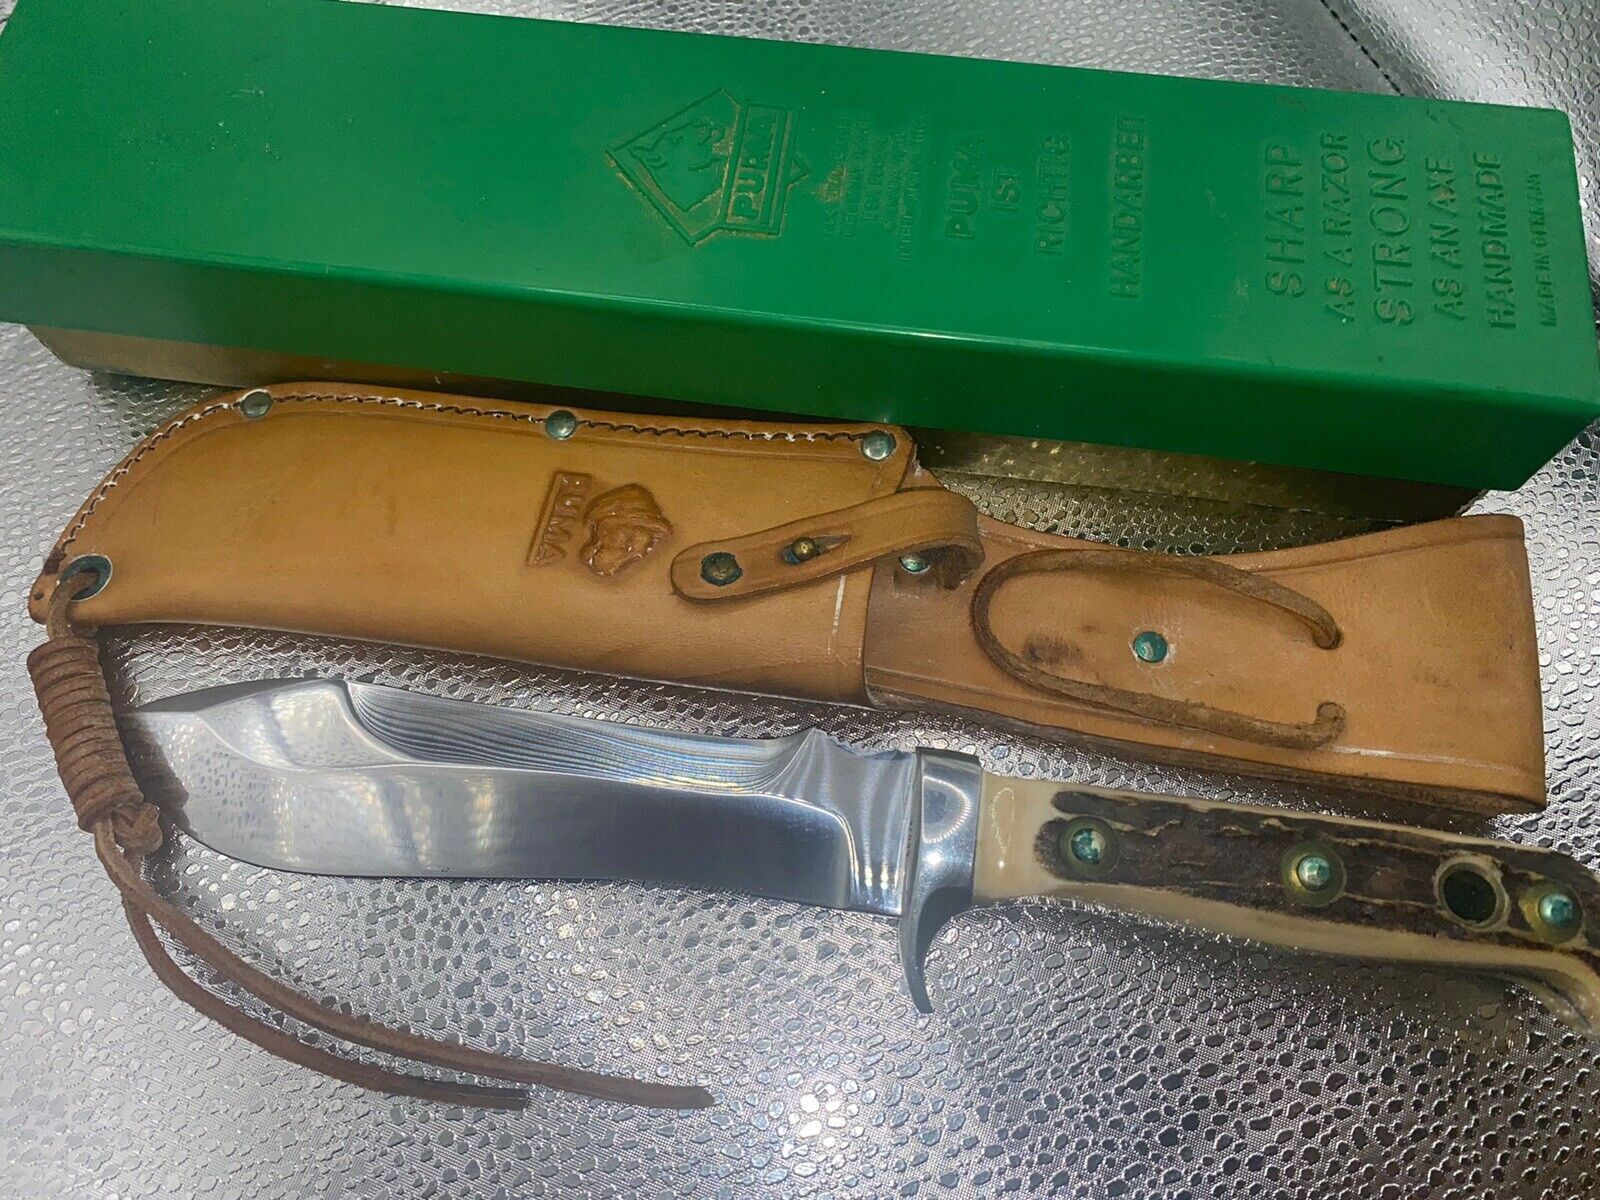 1970 Puma 6377 White Hunter Knife With Stag Handles Leather Sheath/ Box